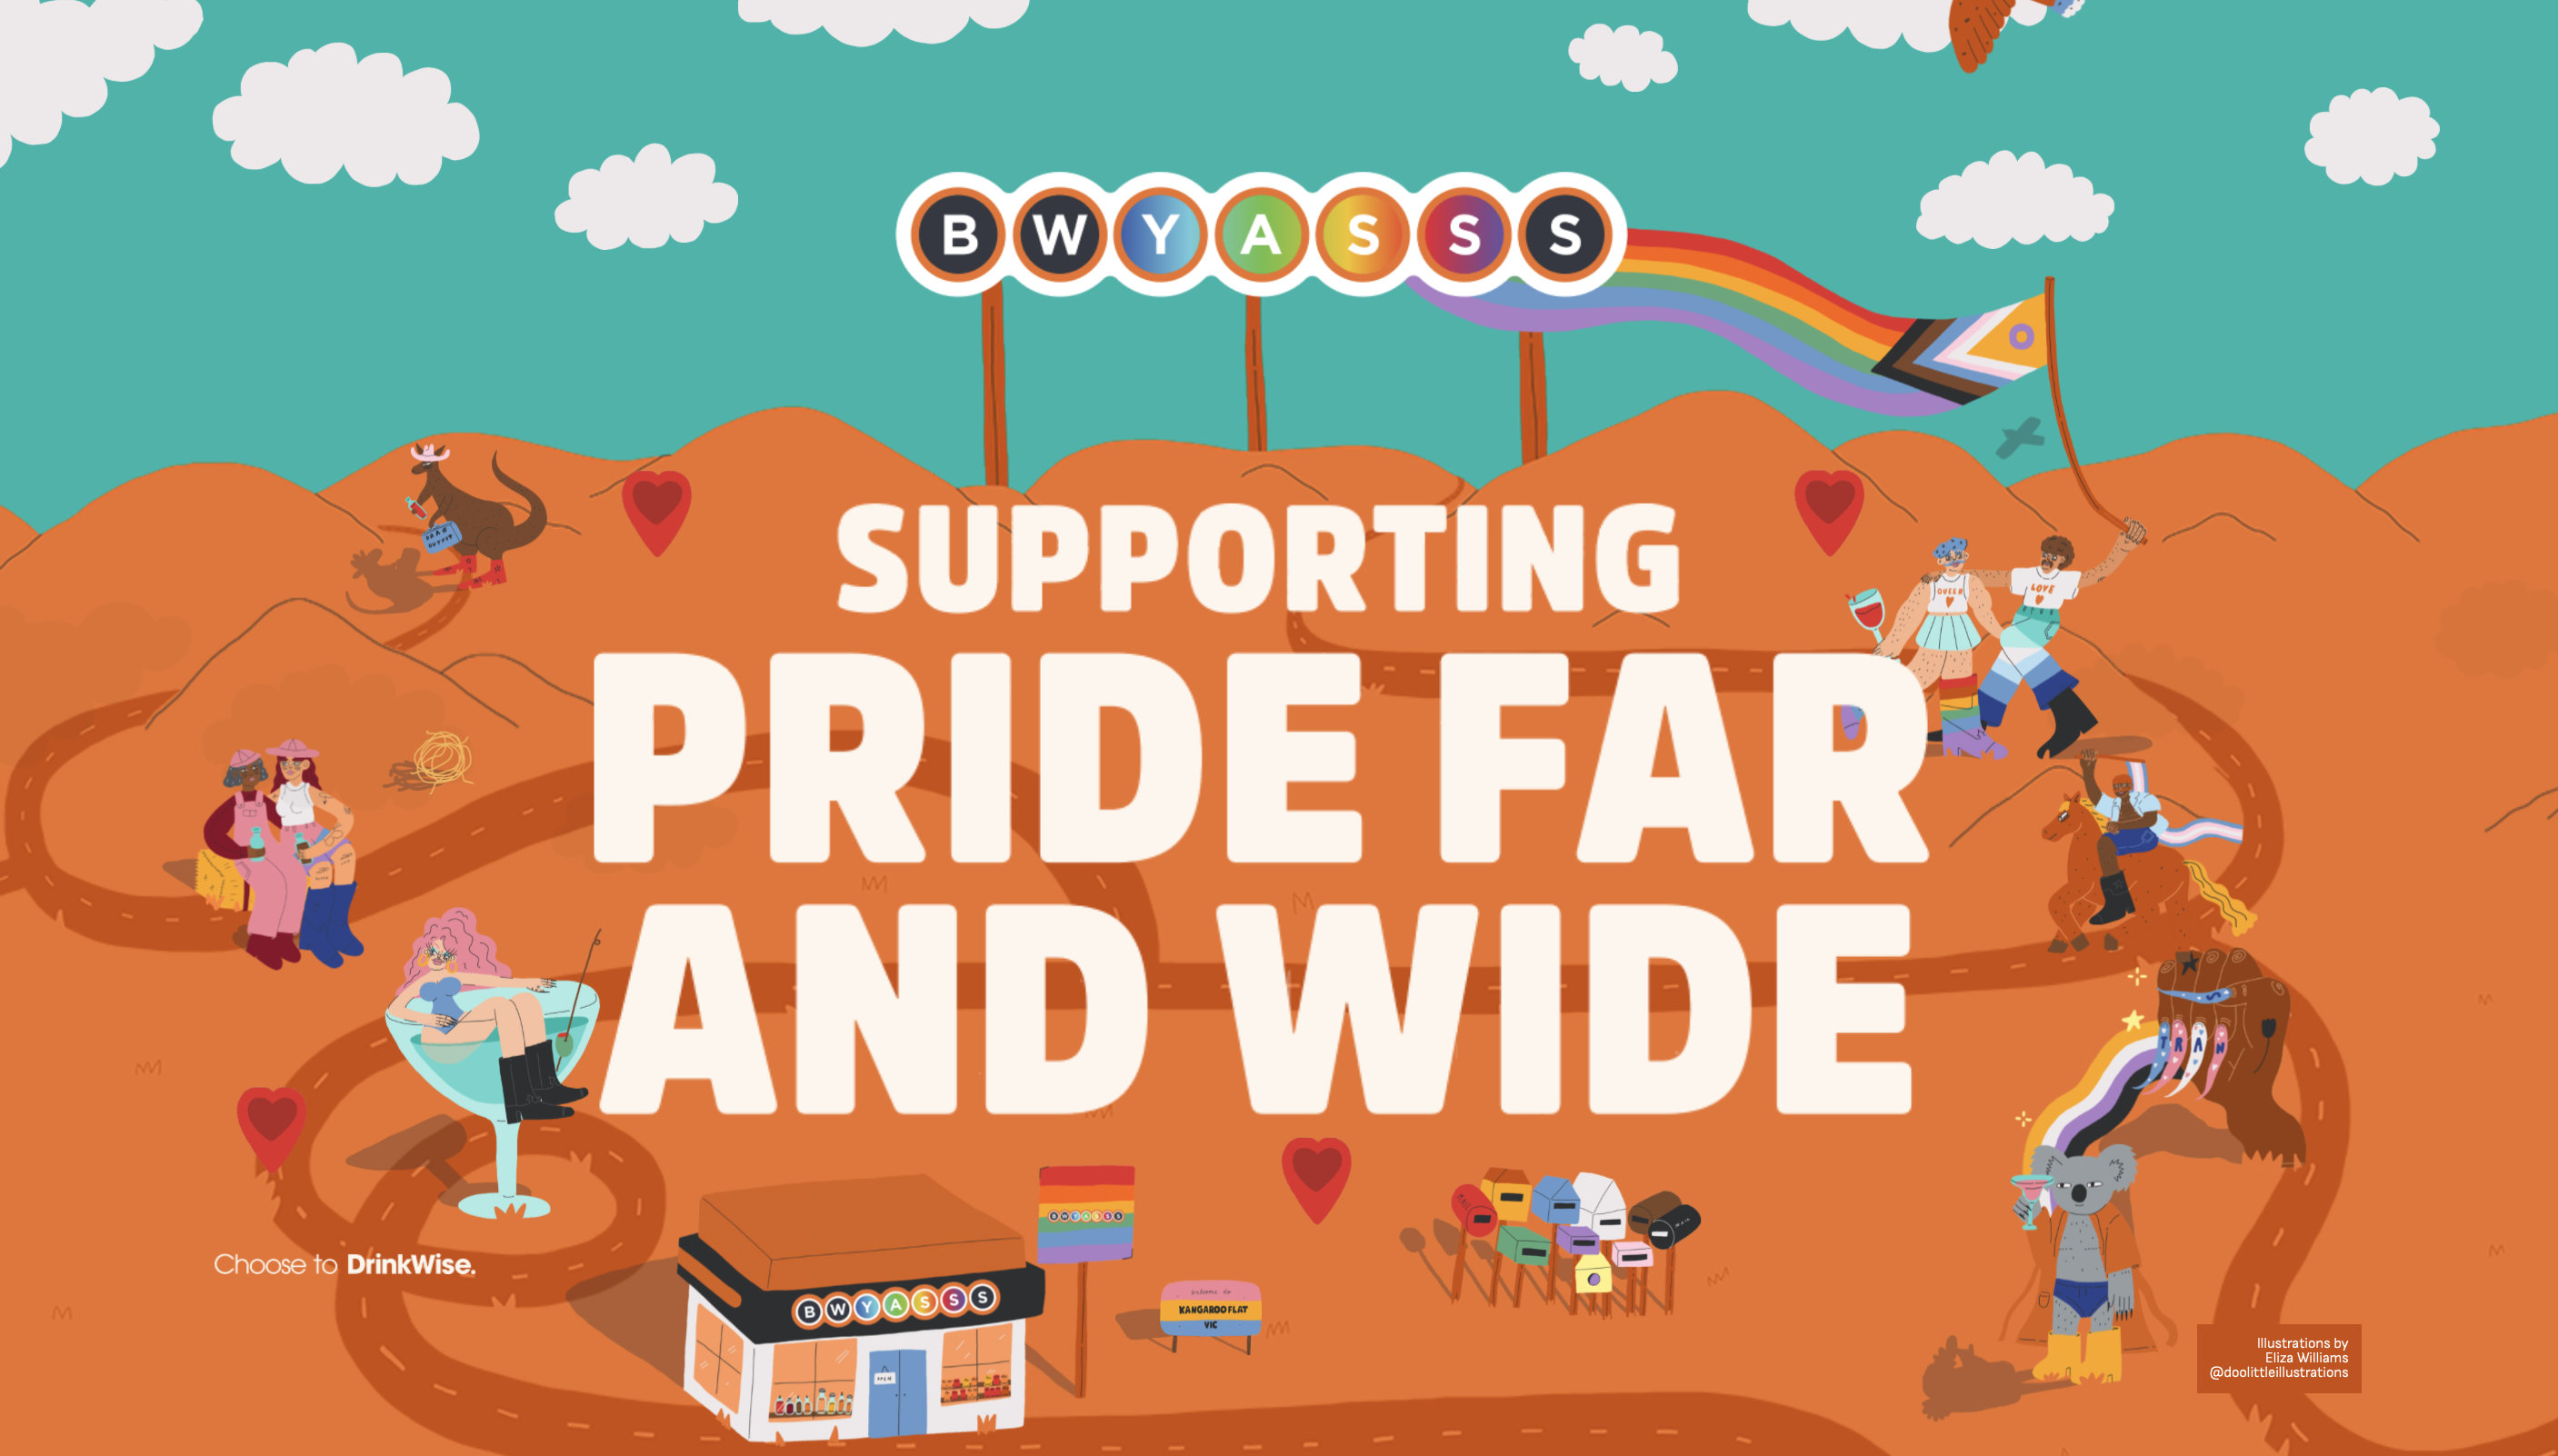 Do You Know An LGBTQIA+-Owned Business? Nominate Them For Our Map And We’ll Spread The Word